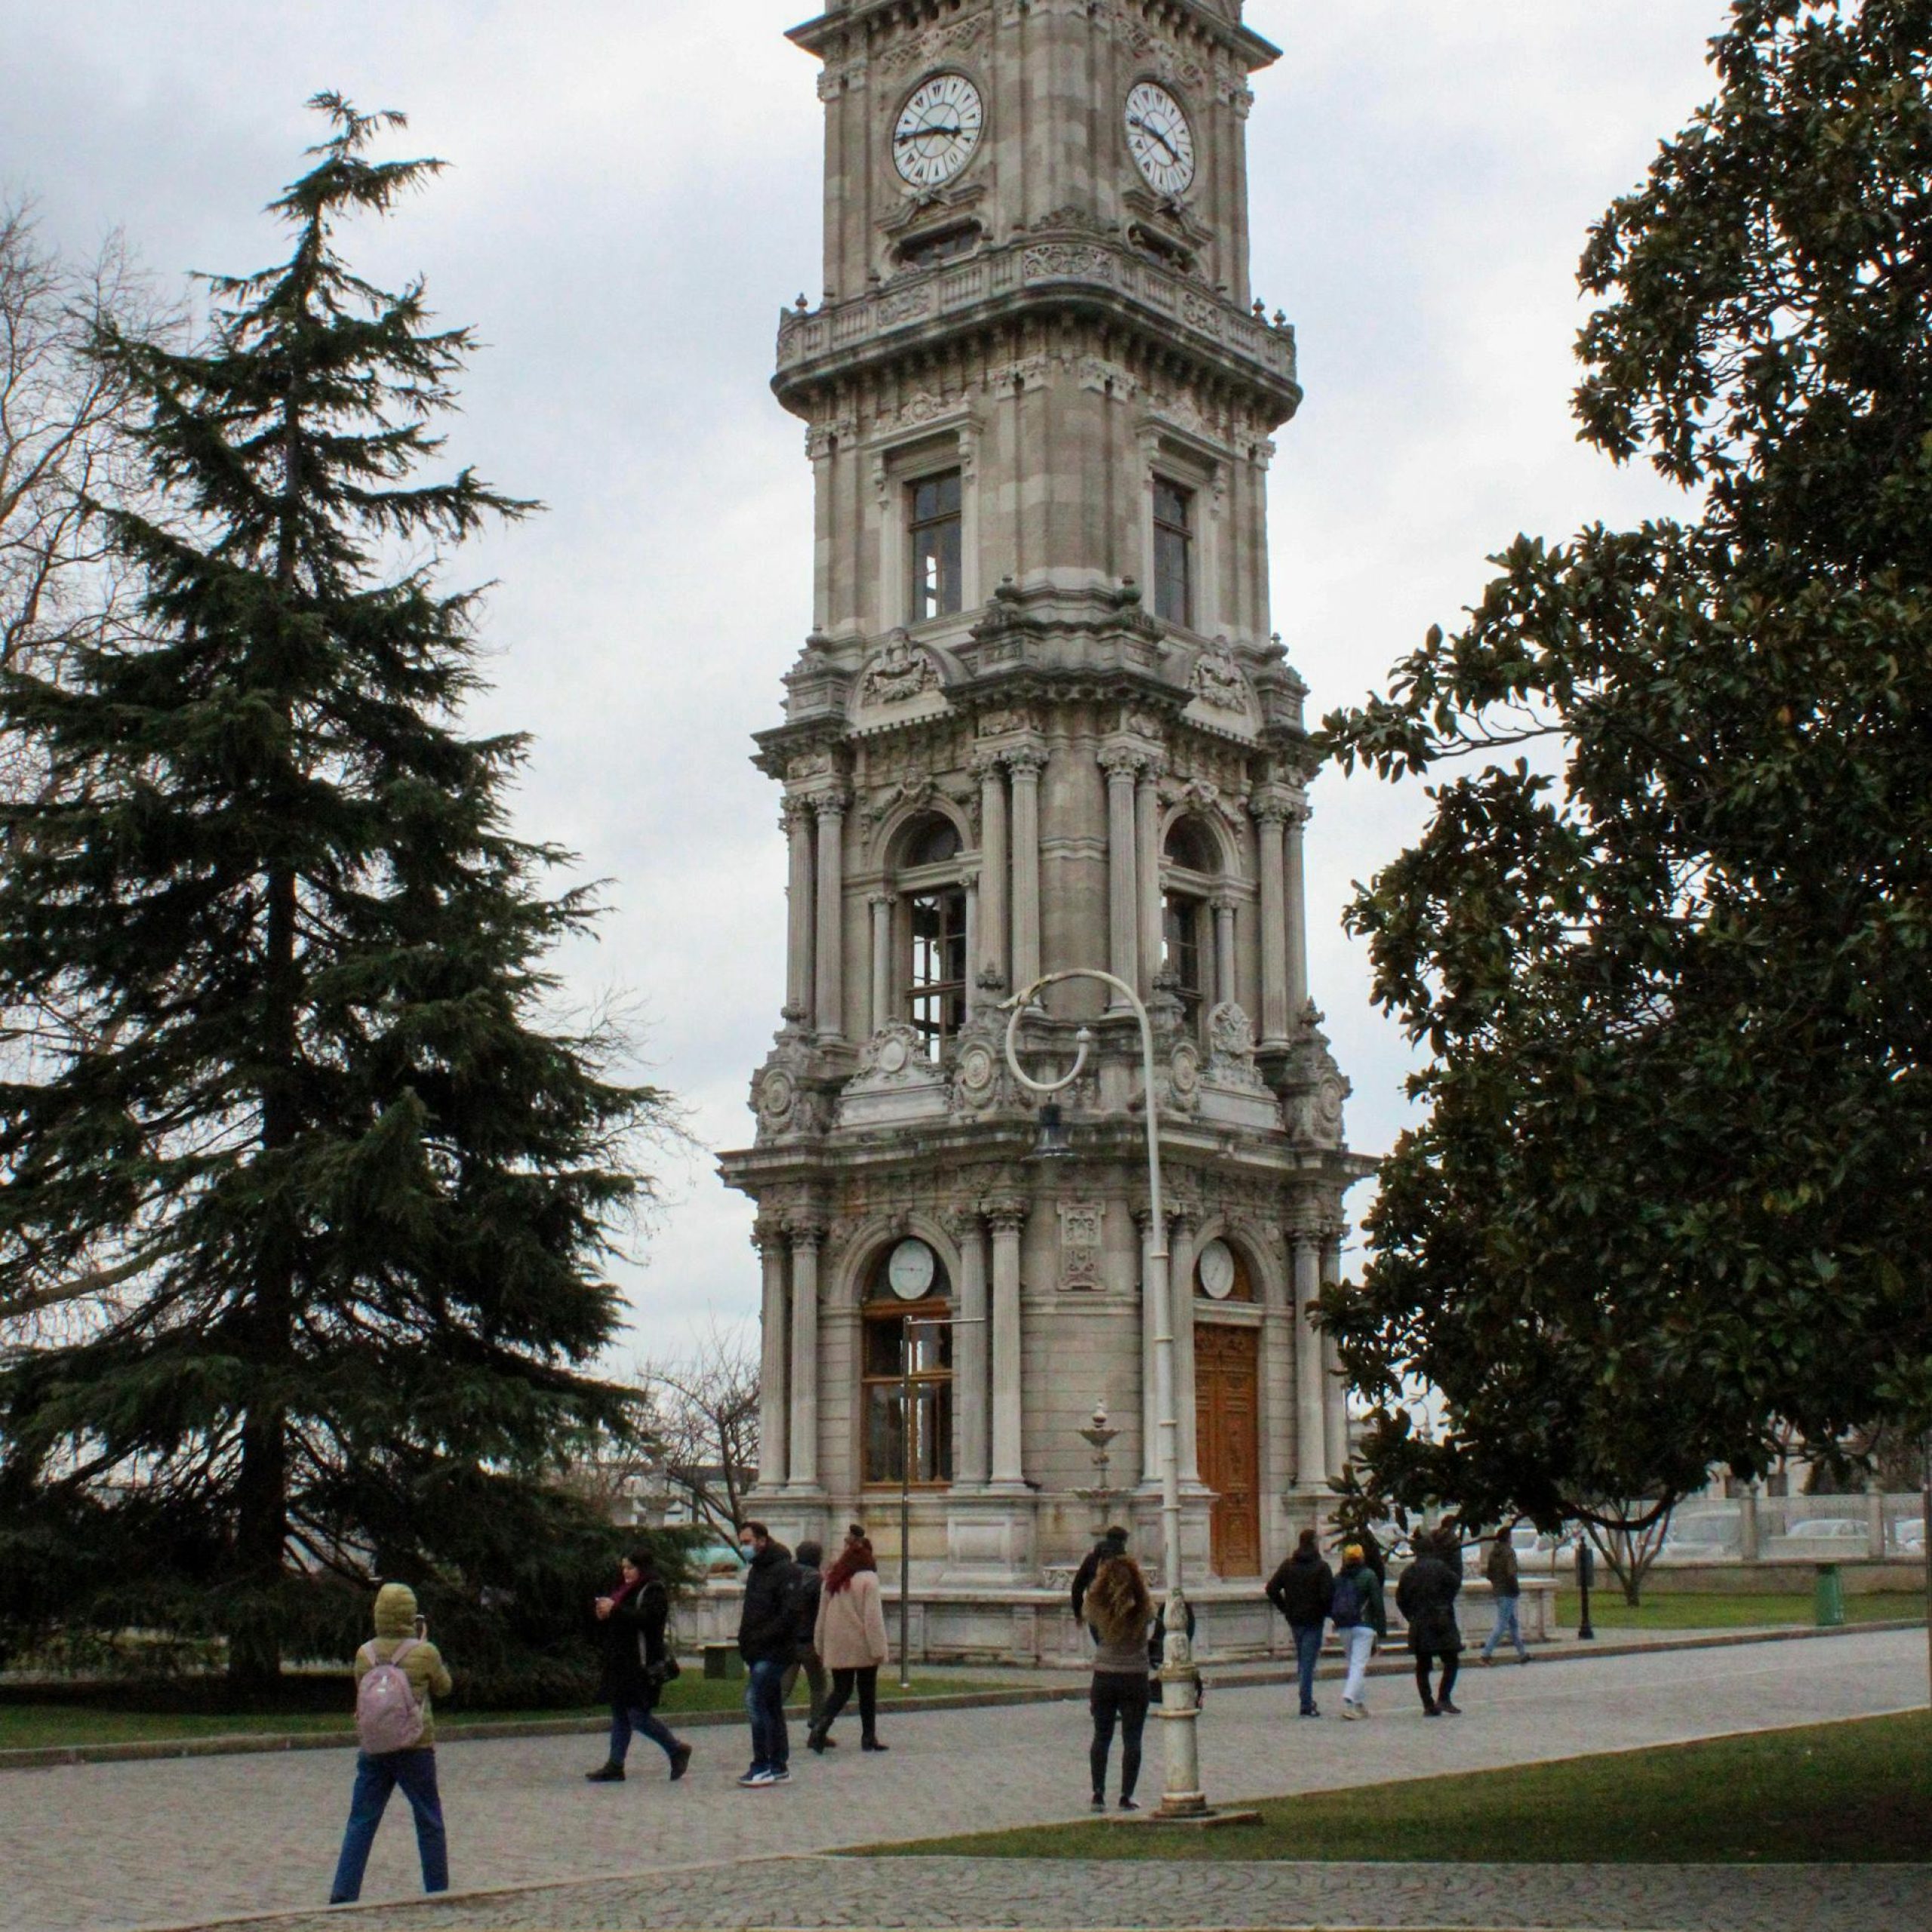 istanbul-tours-activities-dolmabahce-palace-clock-tower2